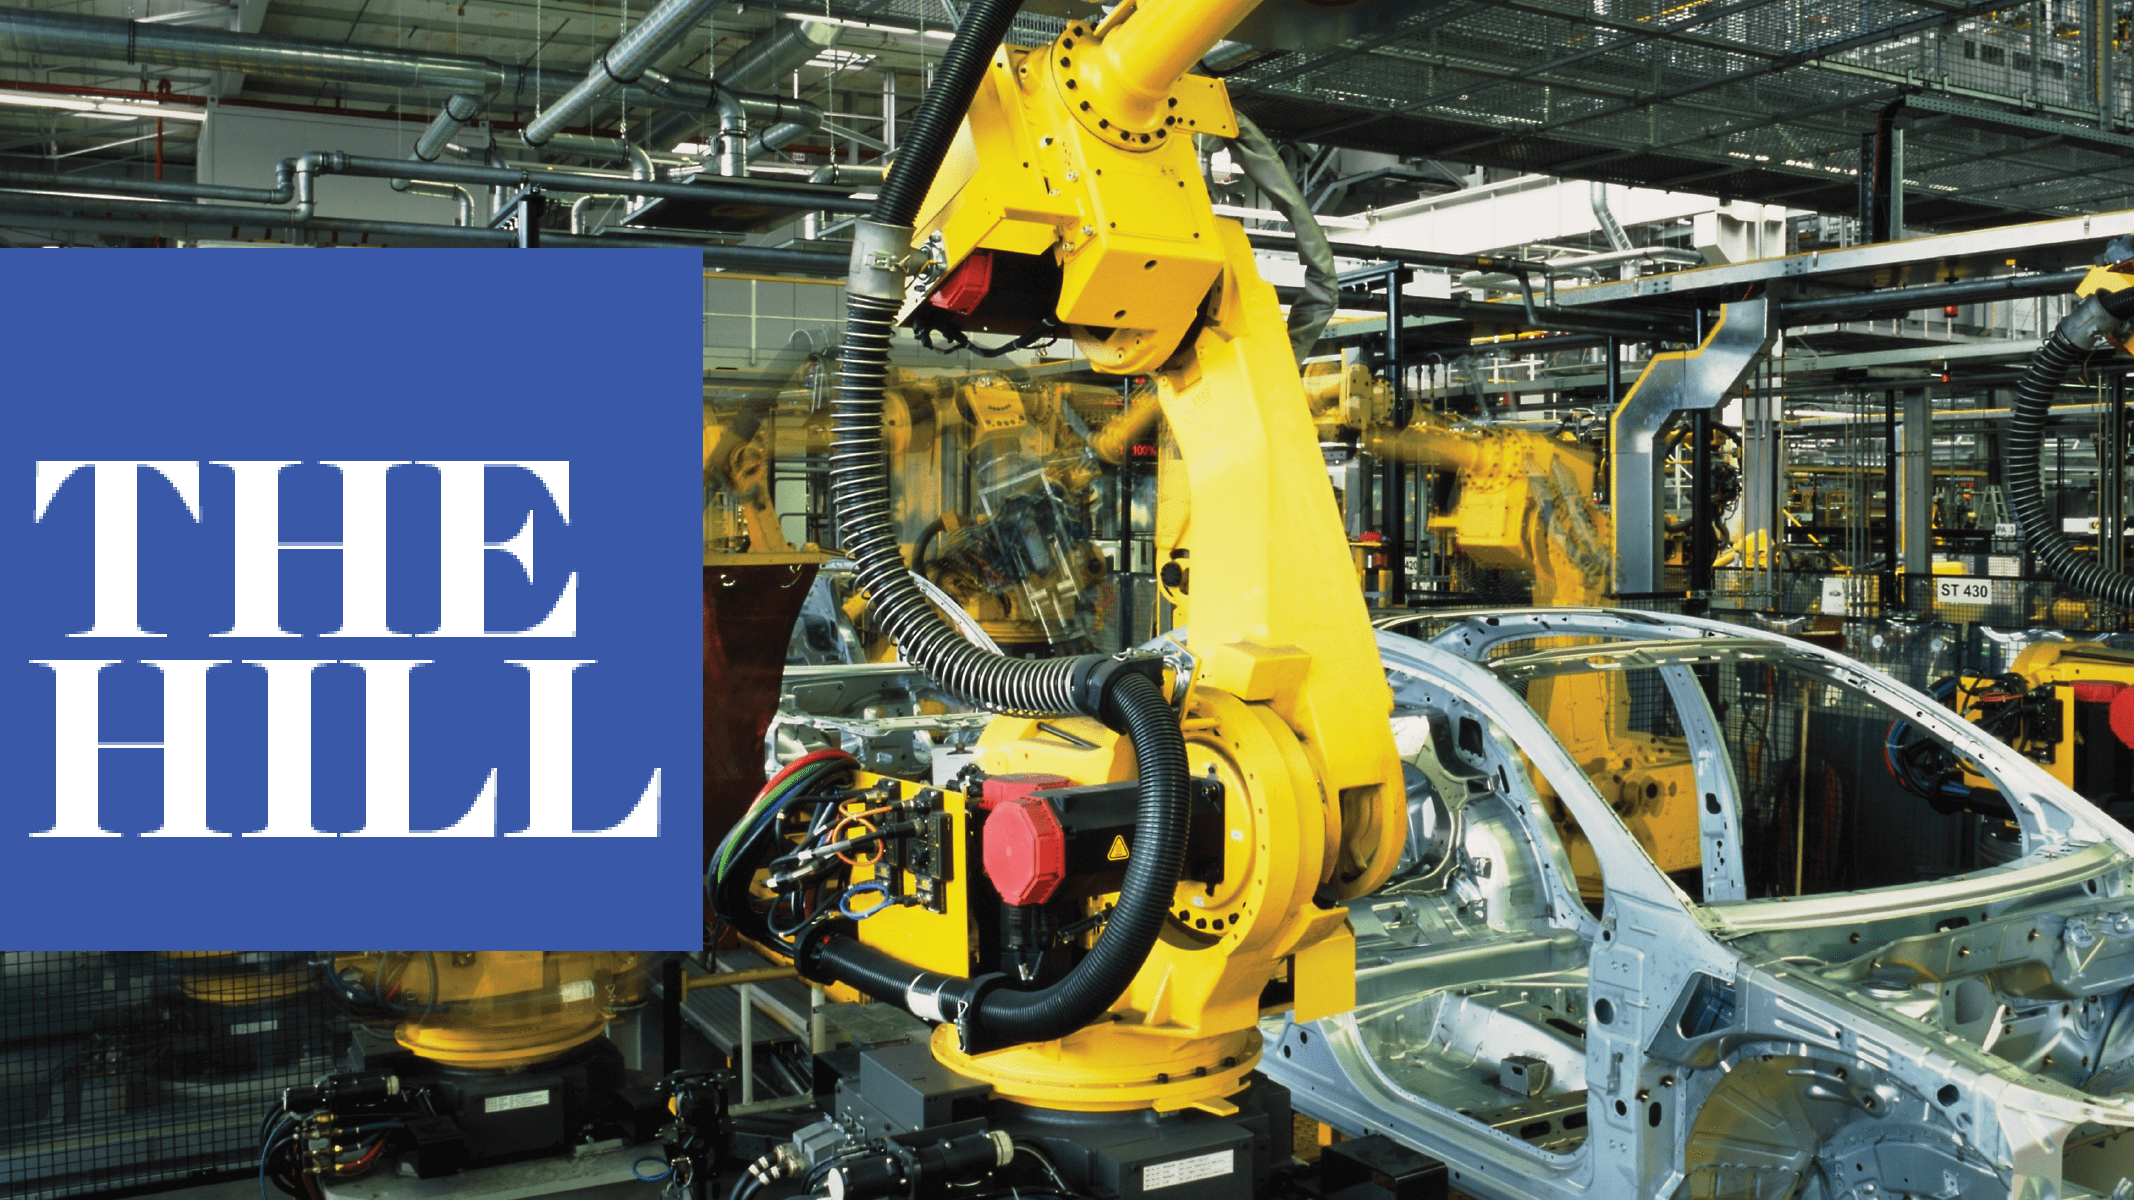 Don't fear the robot: Harness automation to boost labor force - Chevy Chase Trust